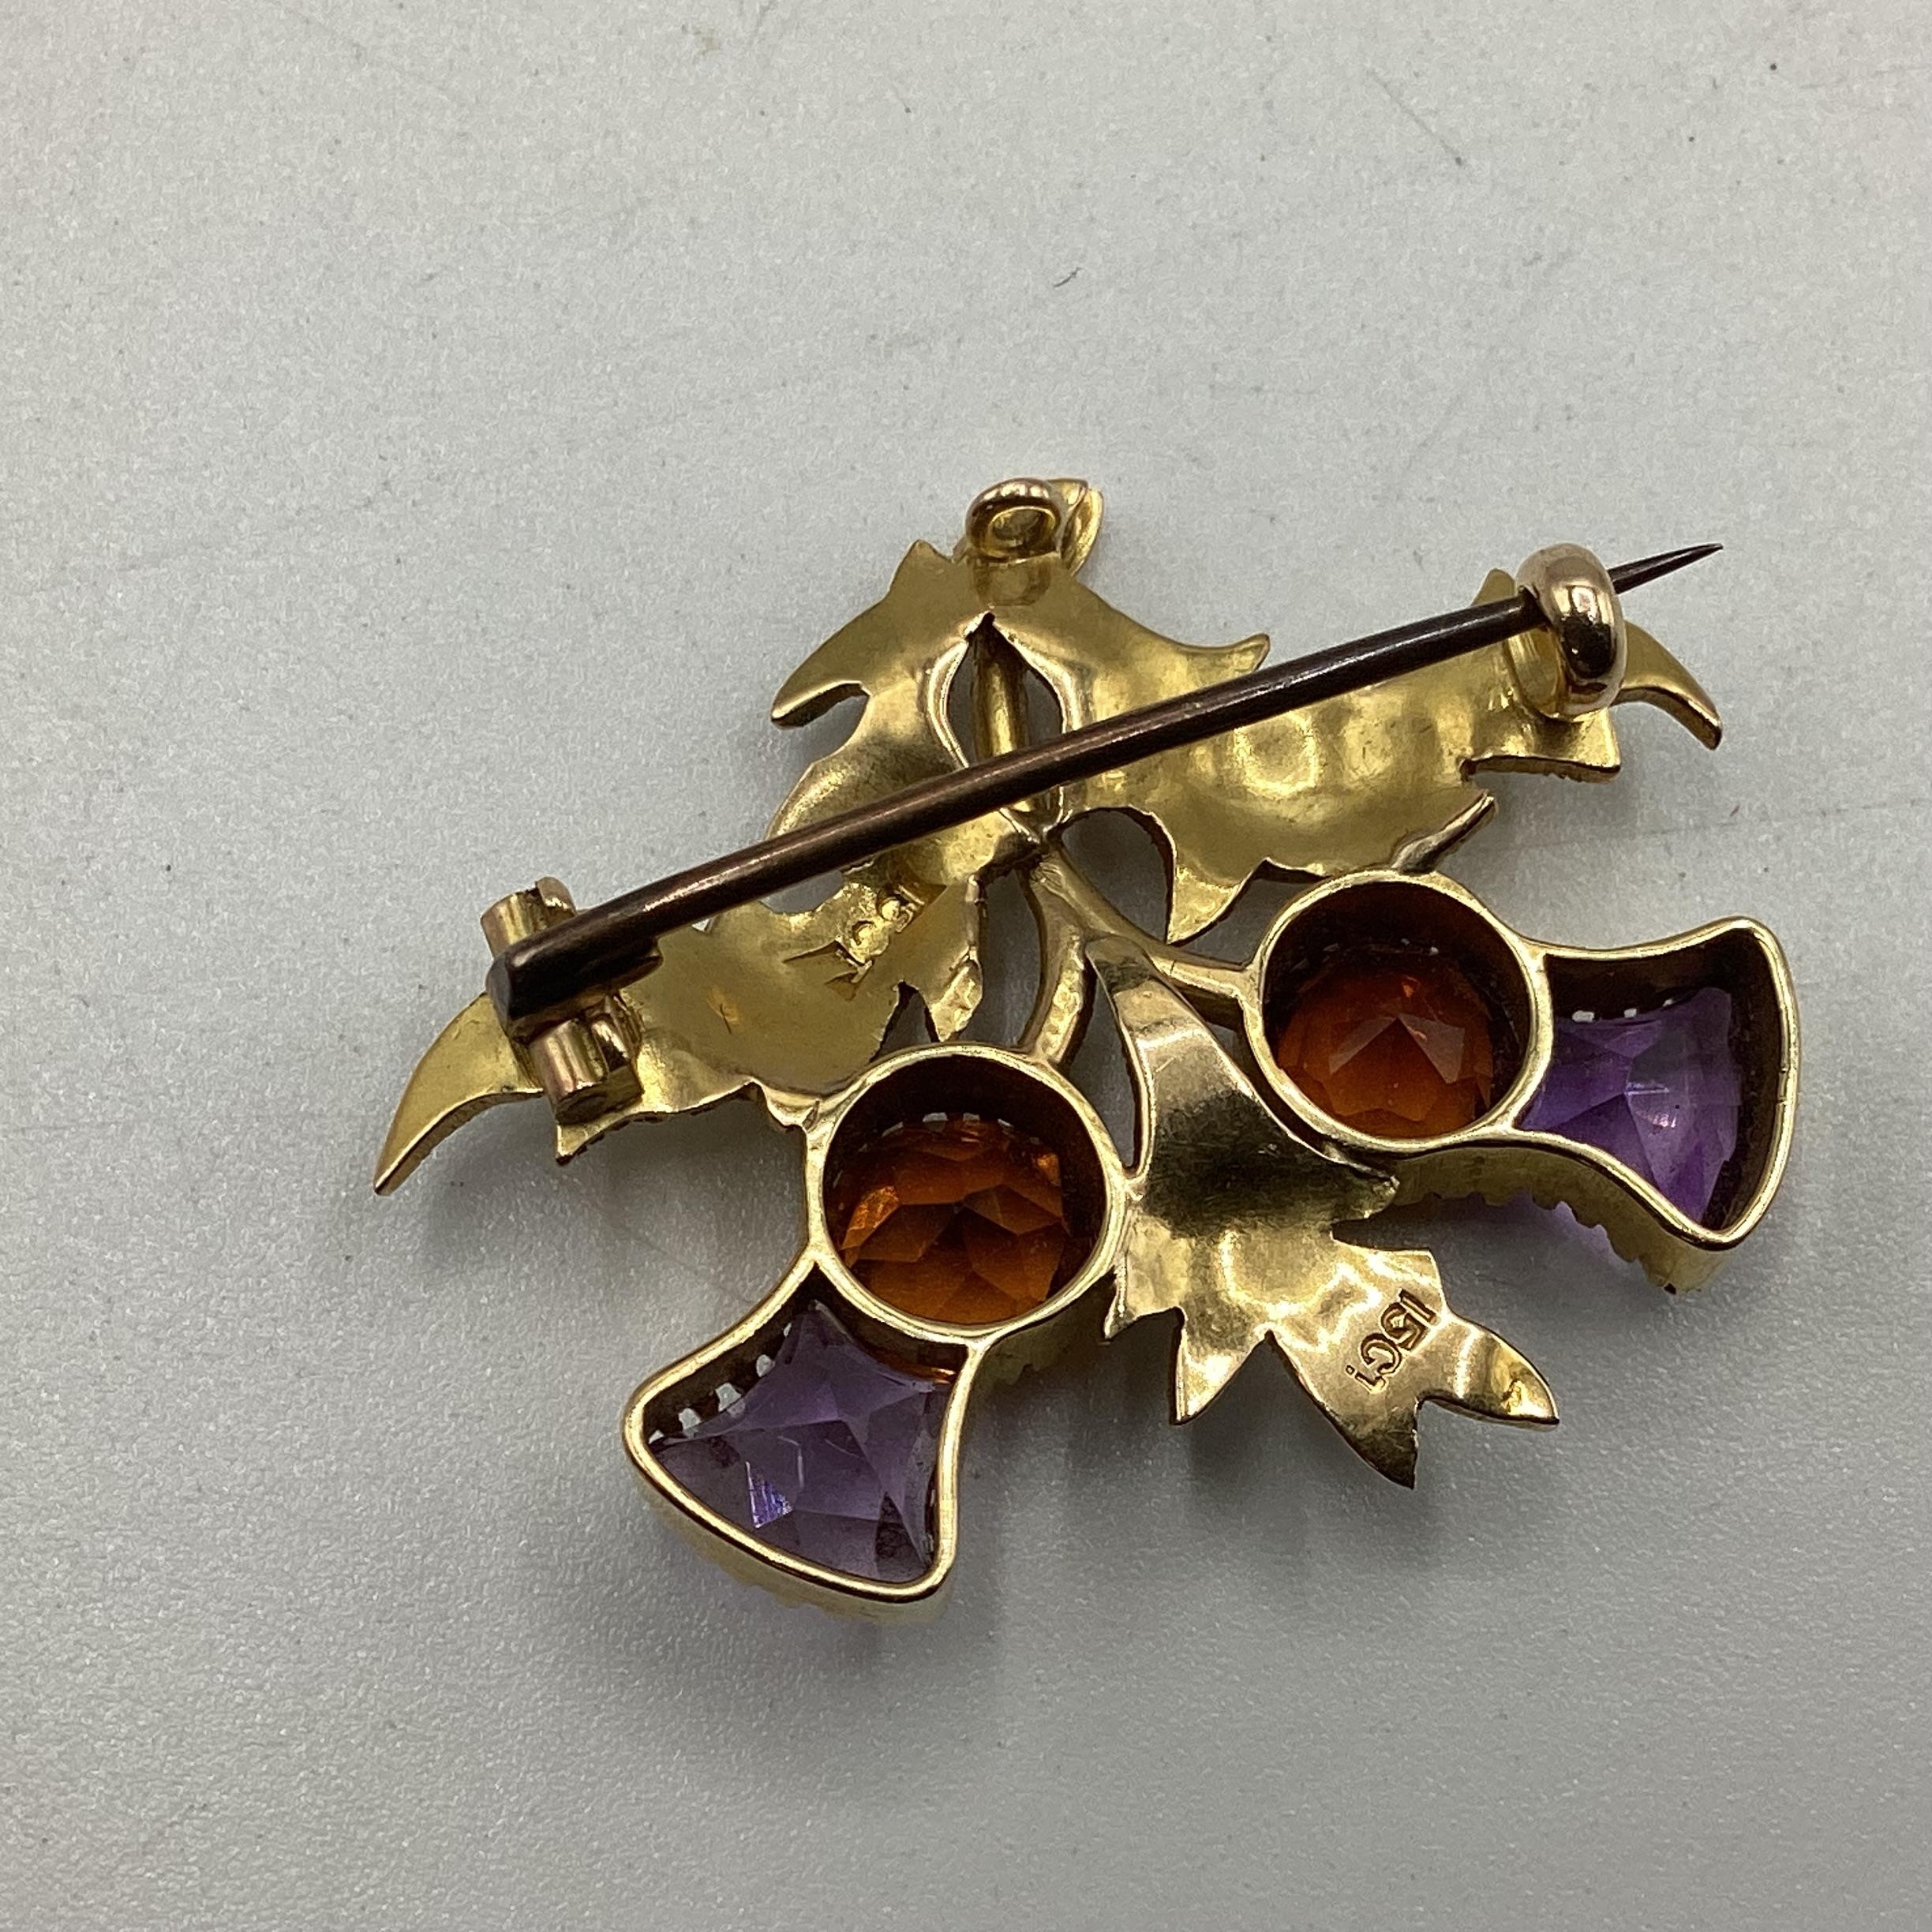 A 15ct gold citrine and amethyst thistle brooch, 4.35 g - Image 2 of 3